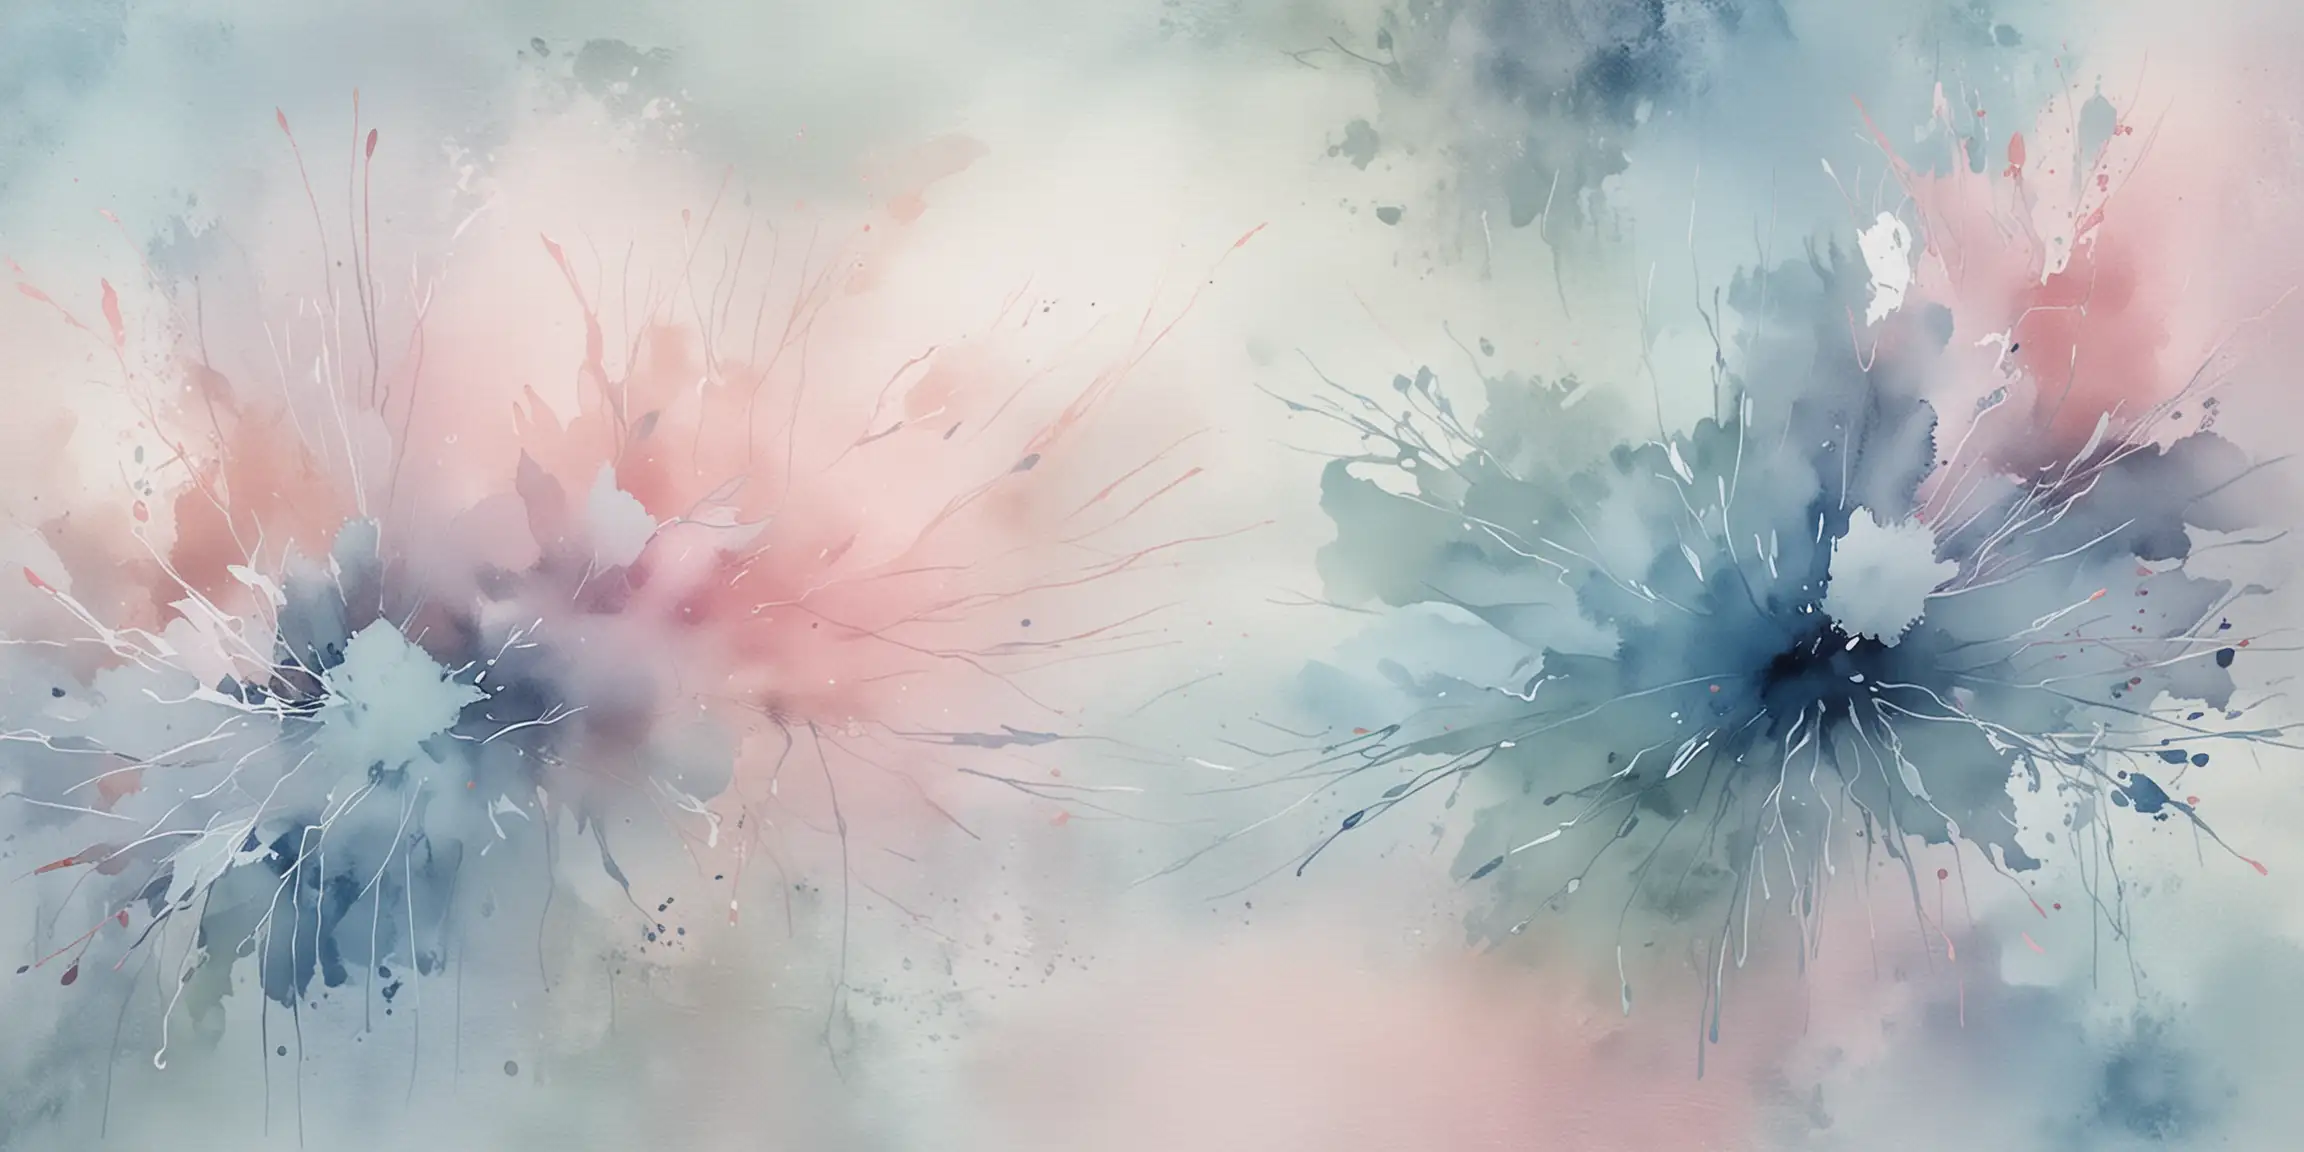 Abstract Watercolor Painting in Soft Blues and Pinks